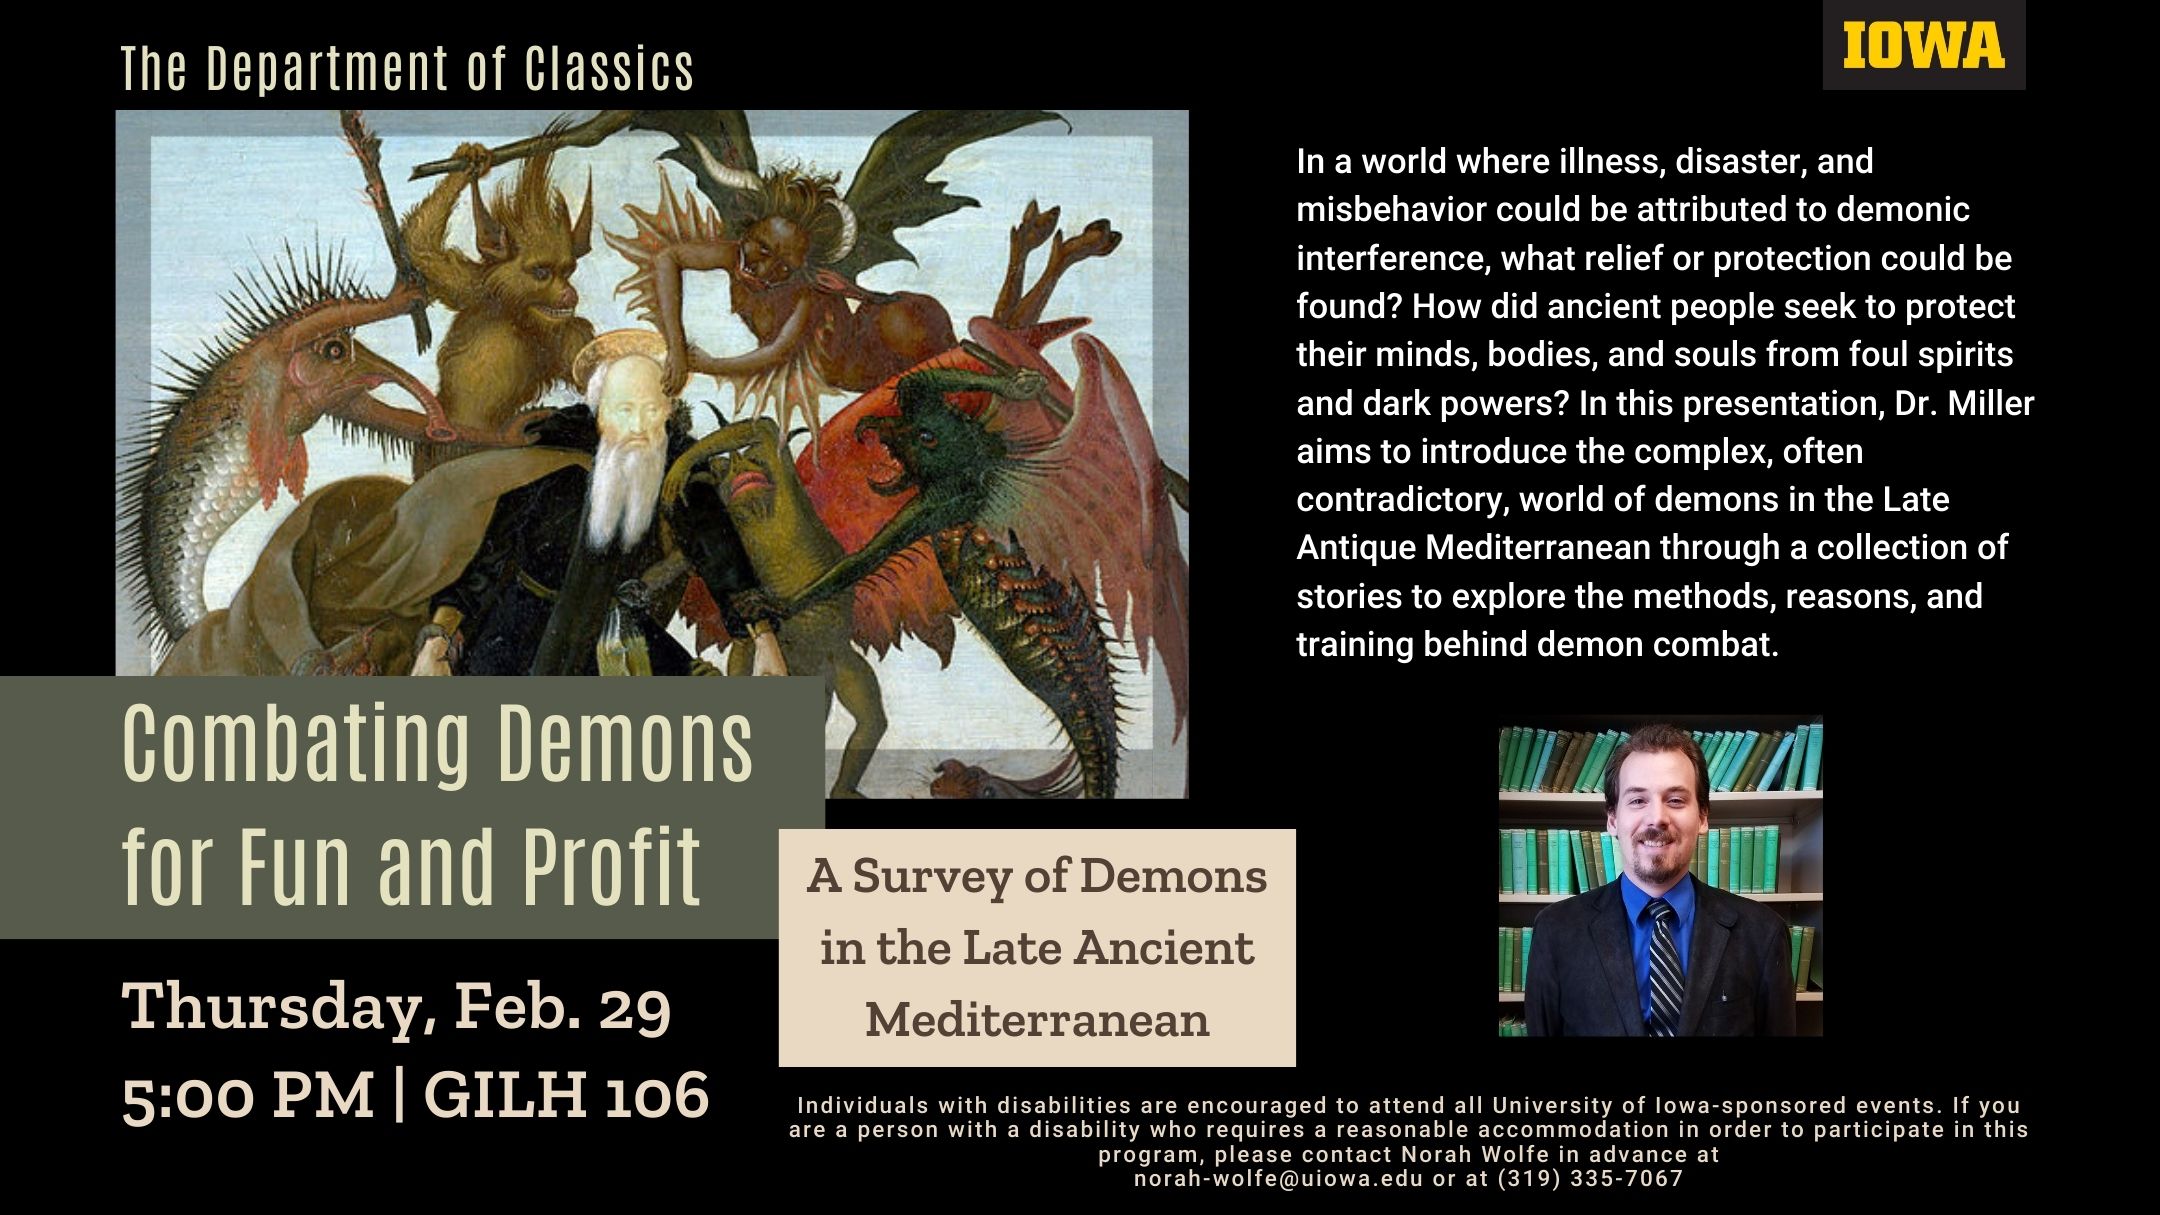 sign advertising Dr. Miller's talk on Feb 29th at 5 pm in GILH 106 titled "Combating Demons for Fun and Profit"